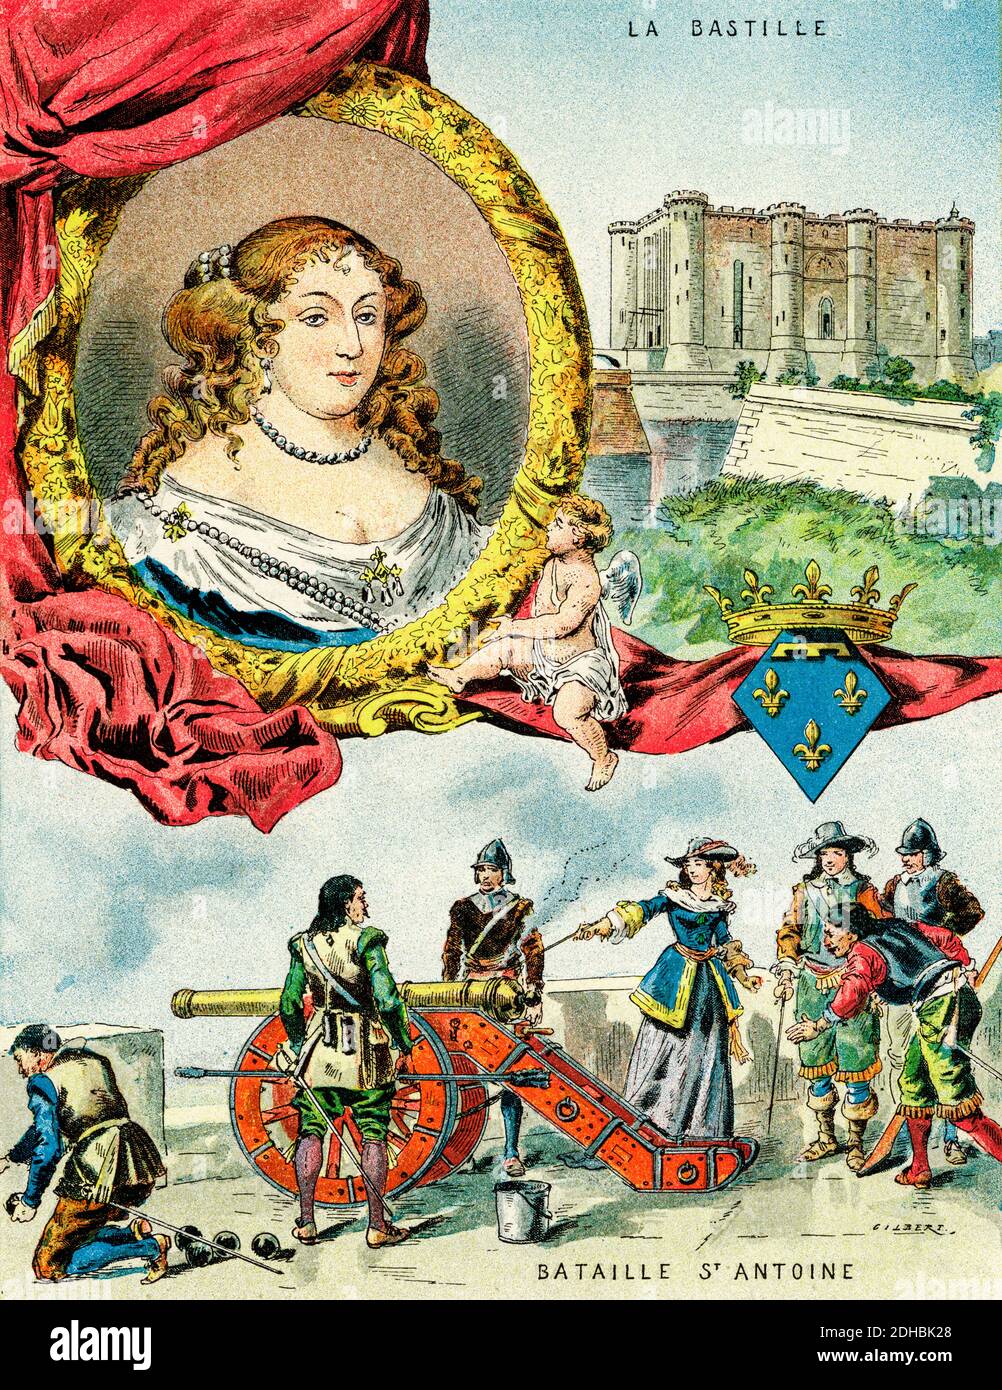 Old color lithography portrait of Anne Marie Louise d'Orleans, Grande Mademoiselle (1627-1693) Duchess of Montpensier, Dauphin of Auvergne, Countess of Eu and Mortain and the Princess of Joinville and Dombes. Daughter of Gaston de Orleans and Marie de Bourbon and granddaughter of Henry IV, a formidable businesswoman. France. Les Français Illustres by Gustave Demoulin 1897 Stock Photo